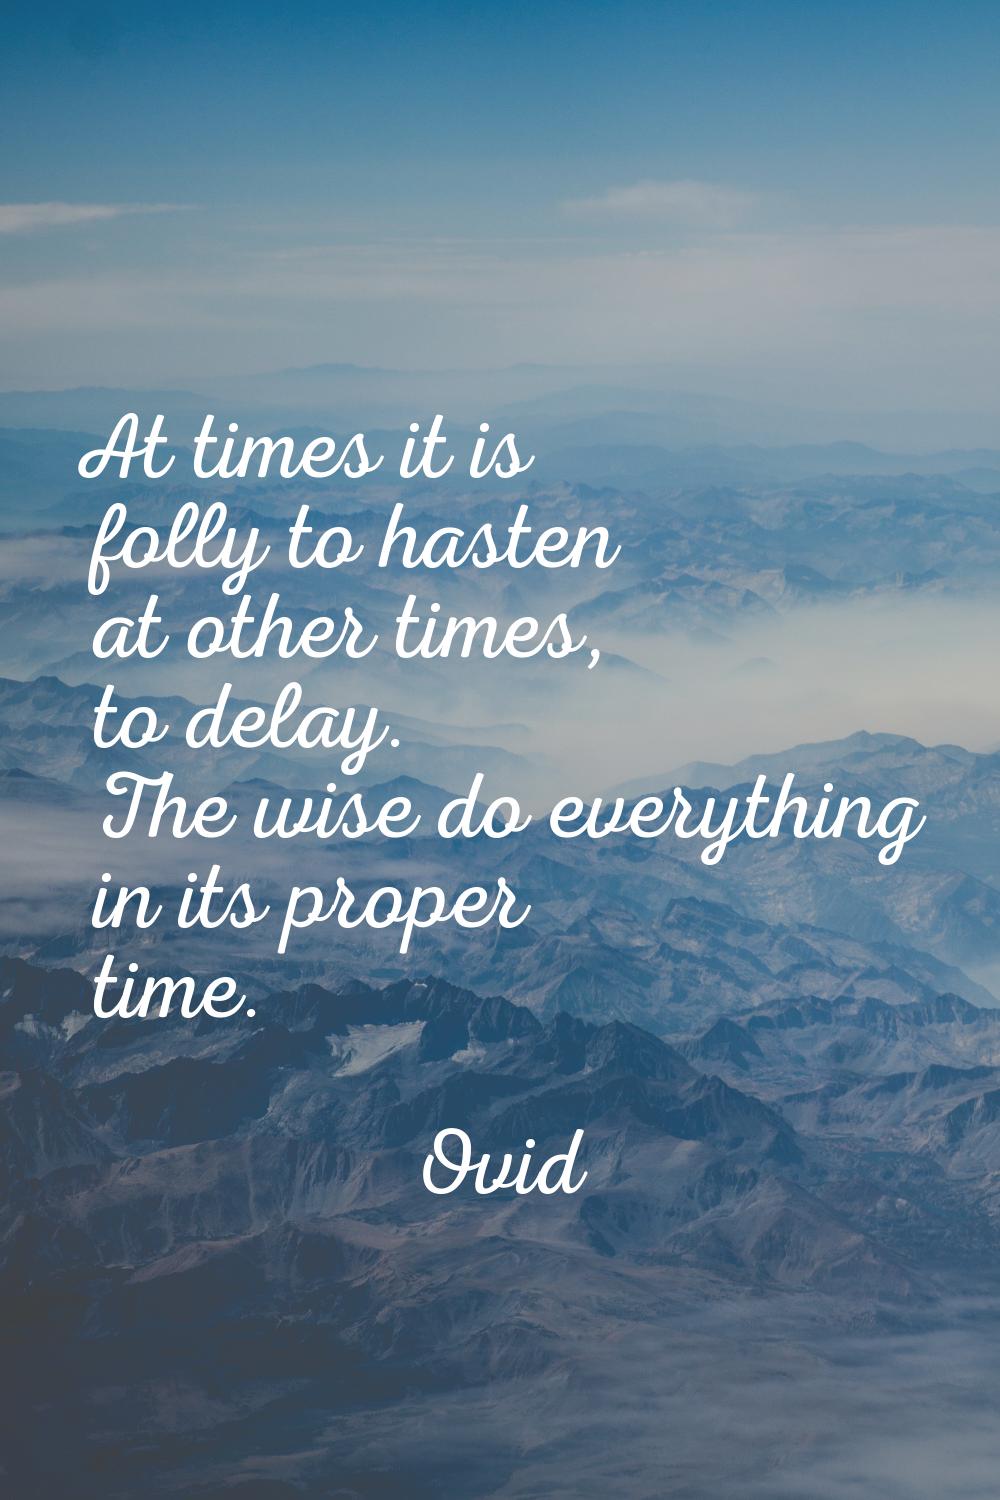 At times it is folly to hasten at other times, to delay. The wise do everything in its proper time.